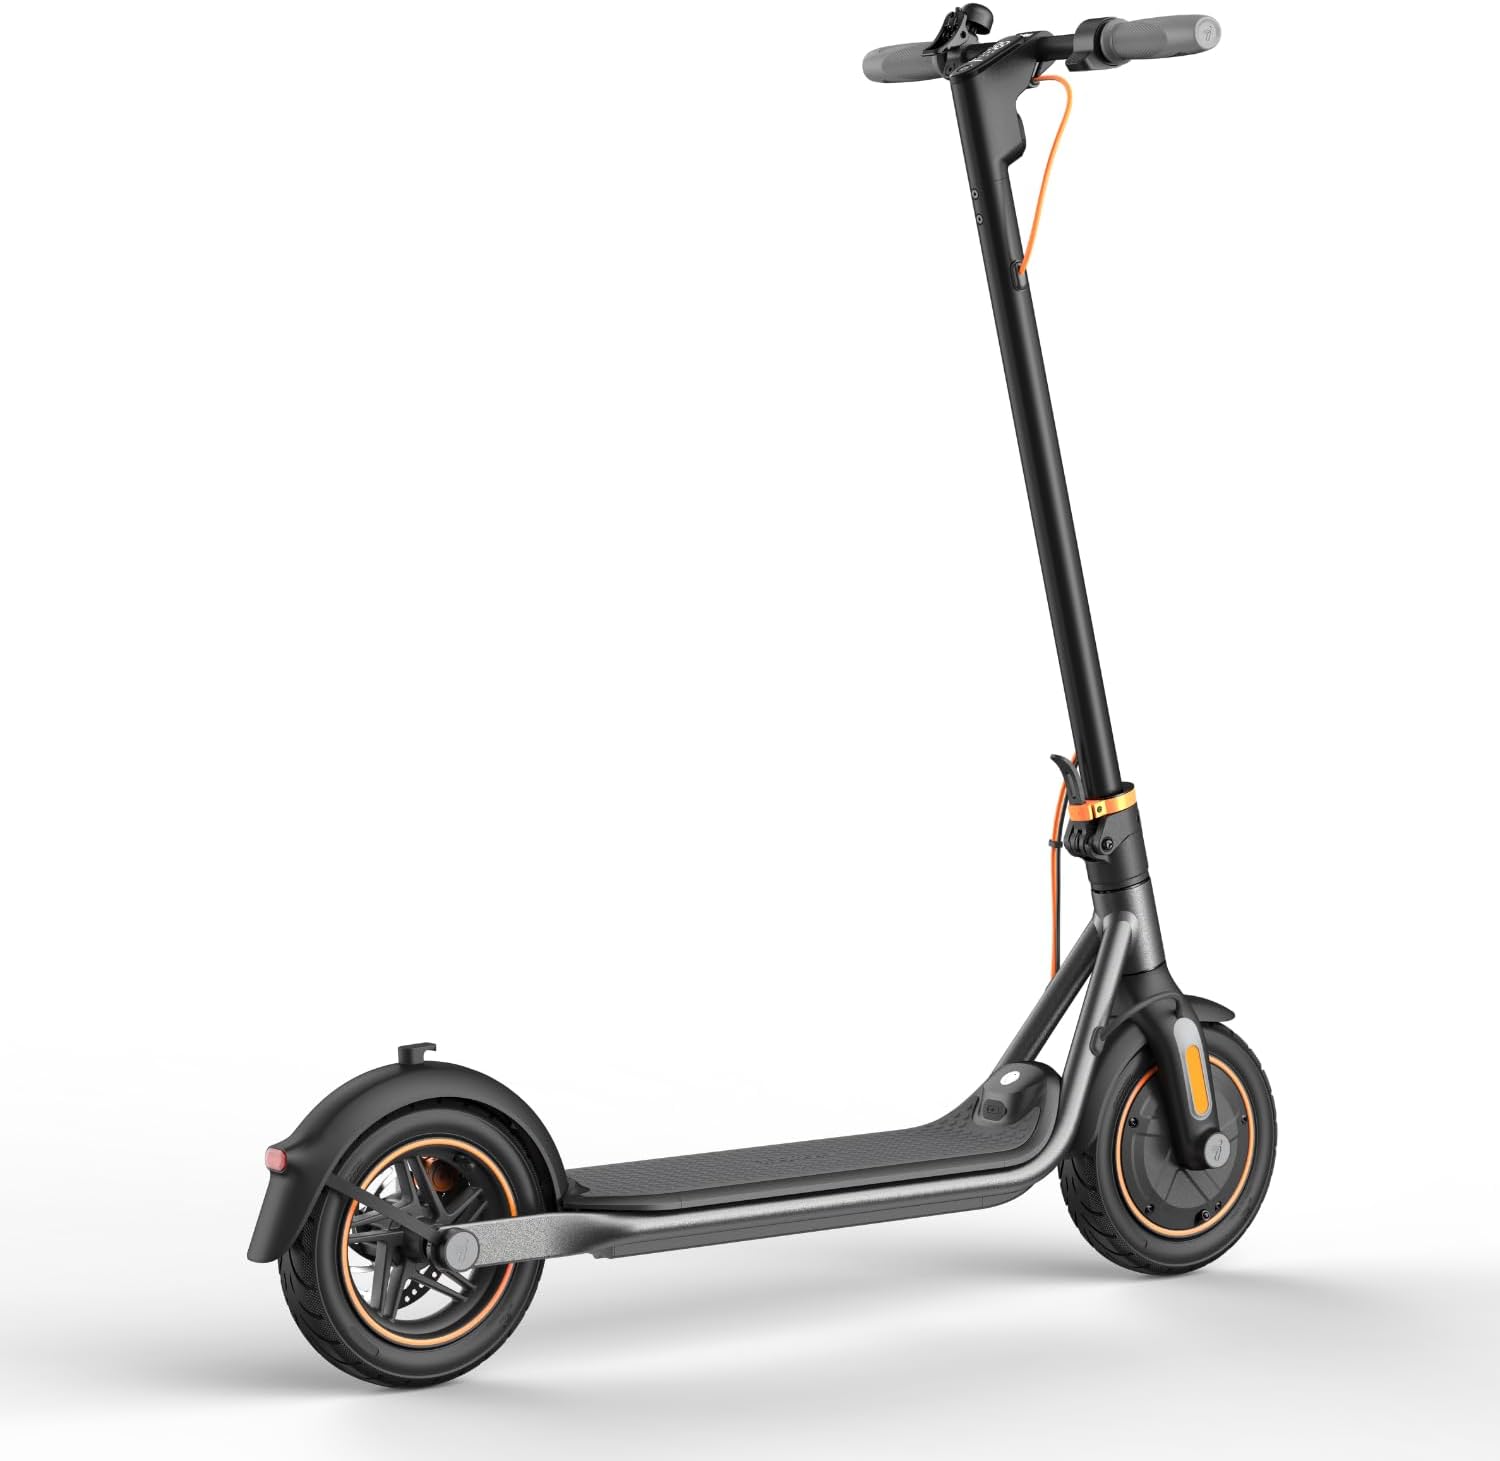 Segway Ninebot F35 Electric Kick Scooter, 350W Motor, 18.6 mph Top Speed, Commuter Scooter for Adults - image 2 of 5